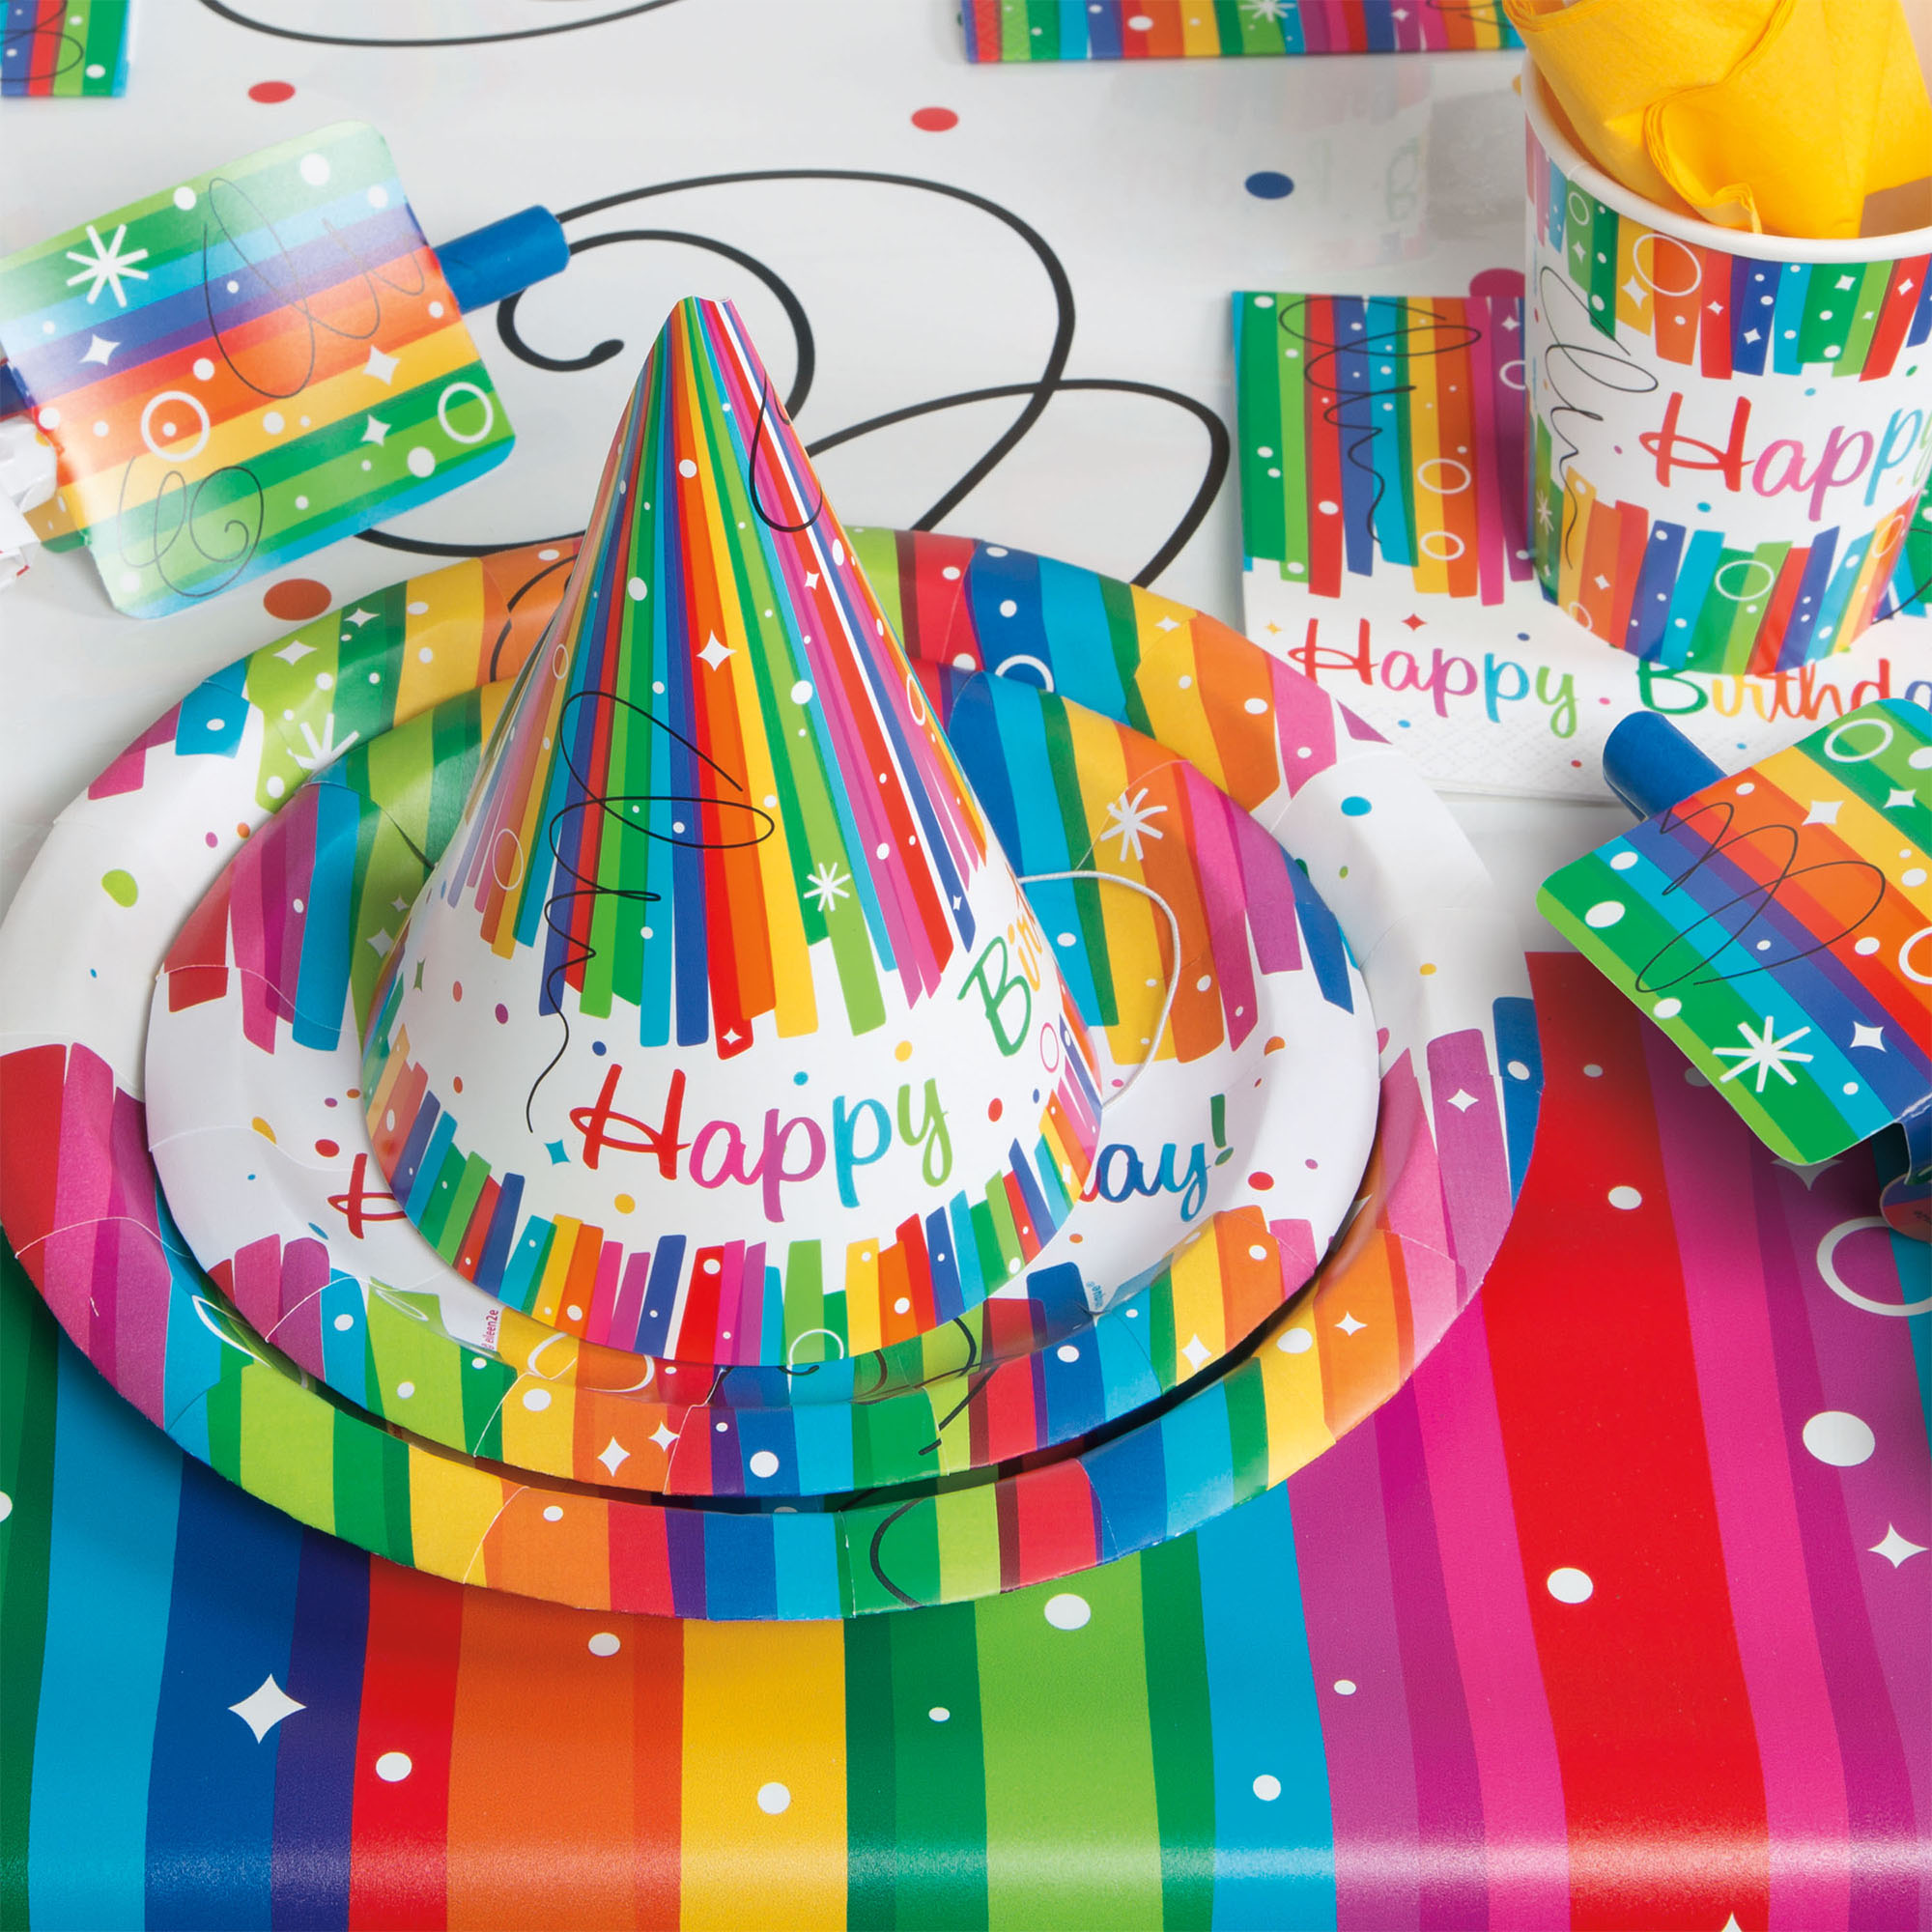 Rainbow Ribbons Birthday Tableware & Decorations - 16 Guests